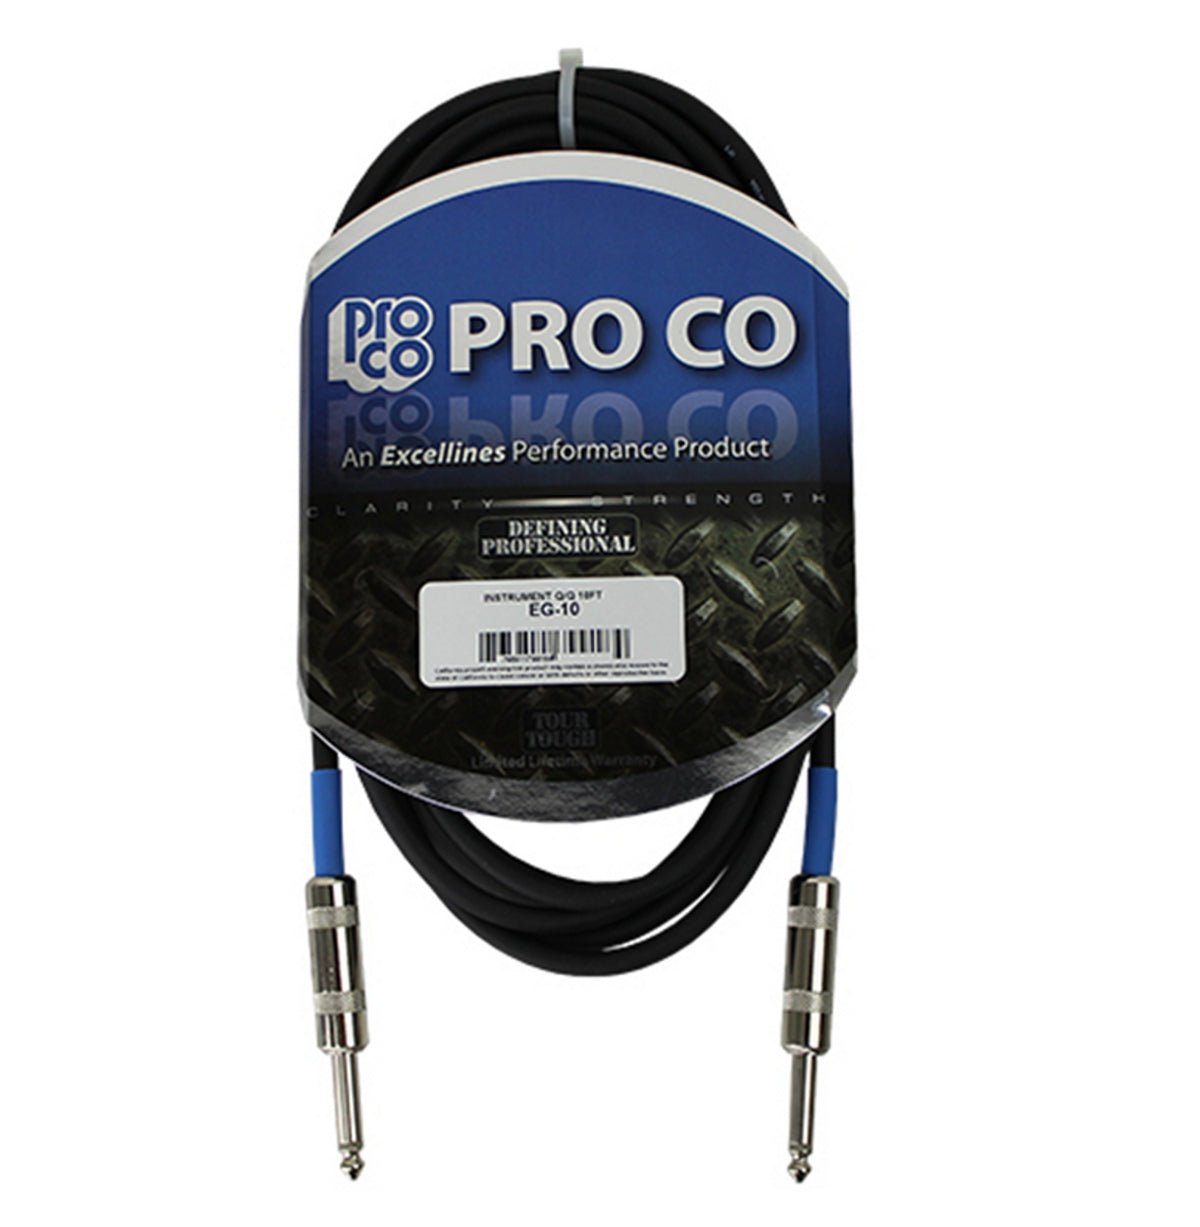 Pro Co EG15 15' Excellines 1/4" Instrument Cable